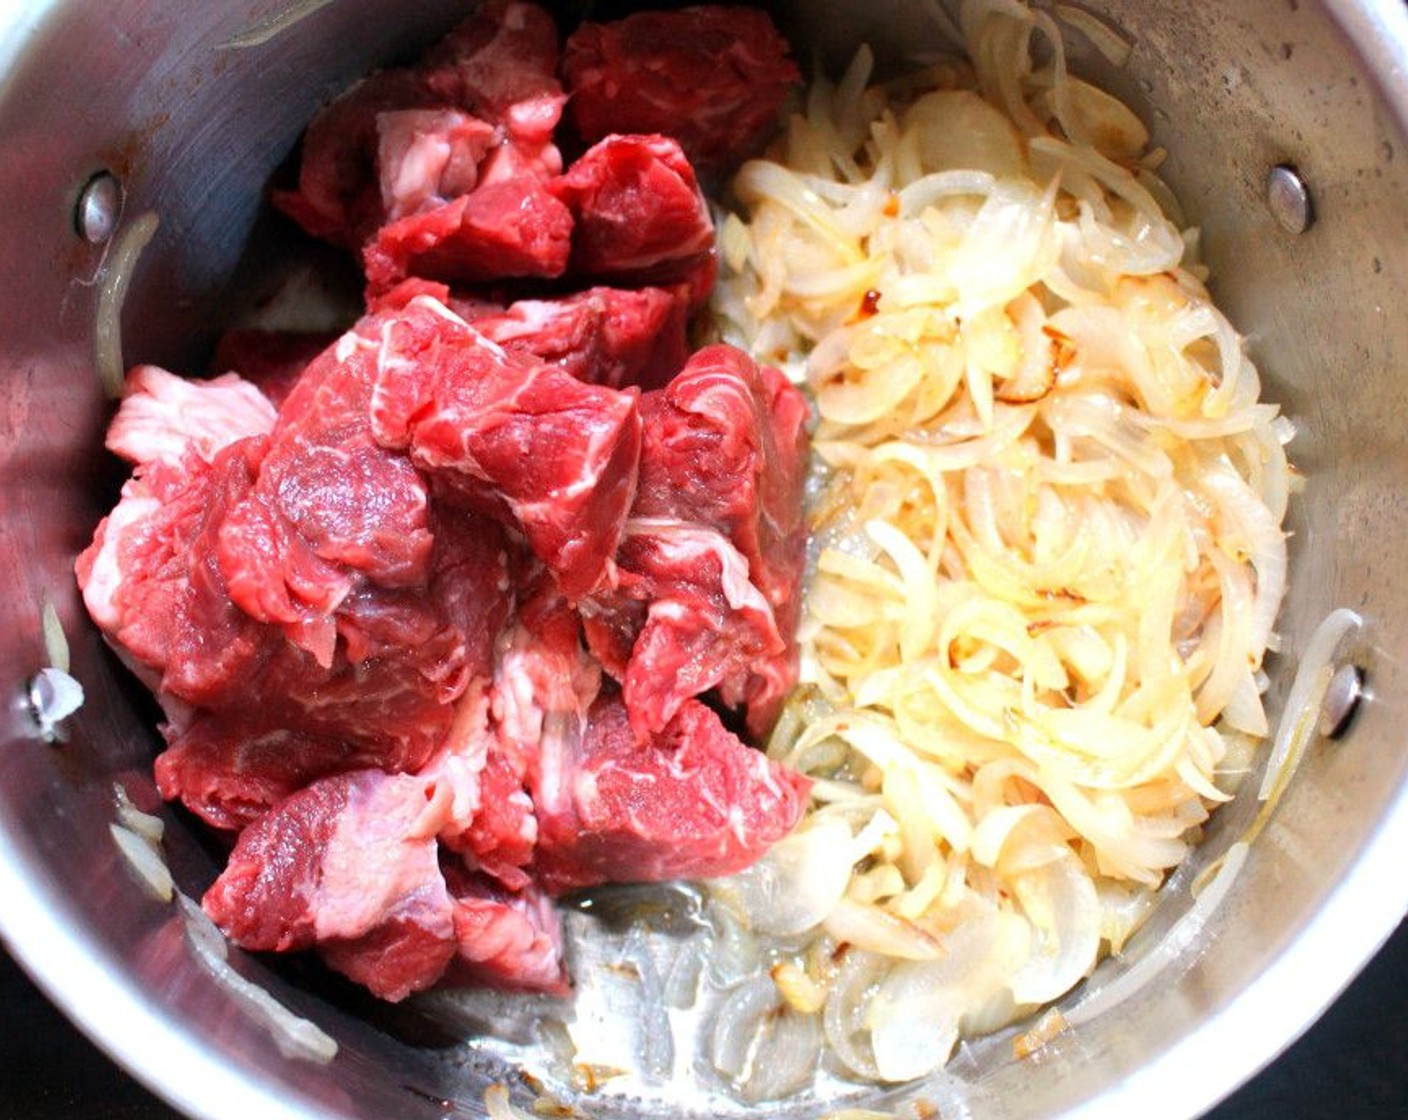 step 4 Add the cubed beef to the onions, then cover and braise until most liquid has evaporated, about 15 minutes.